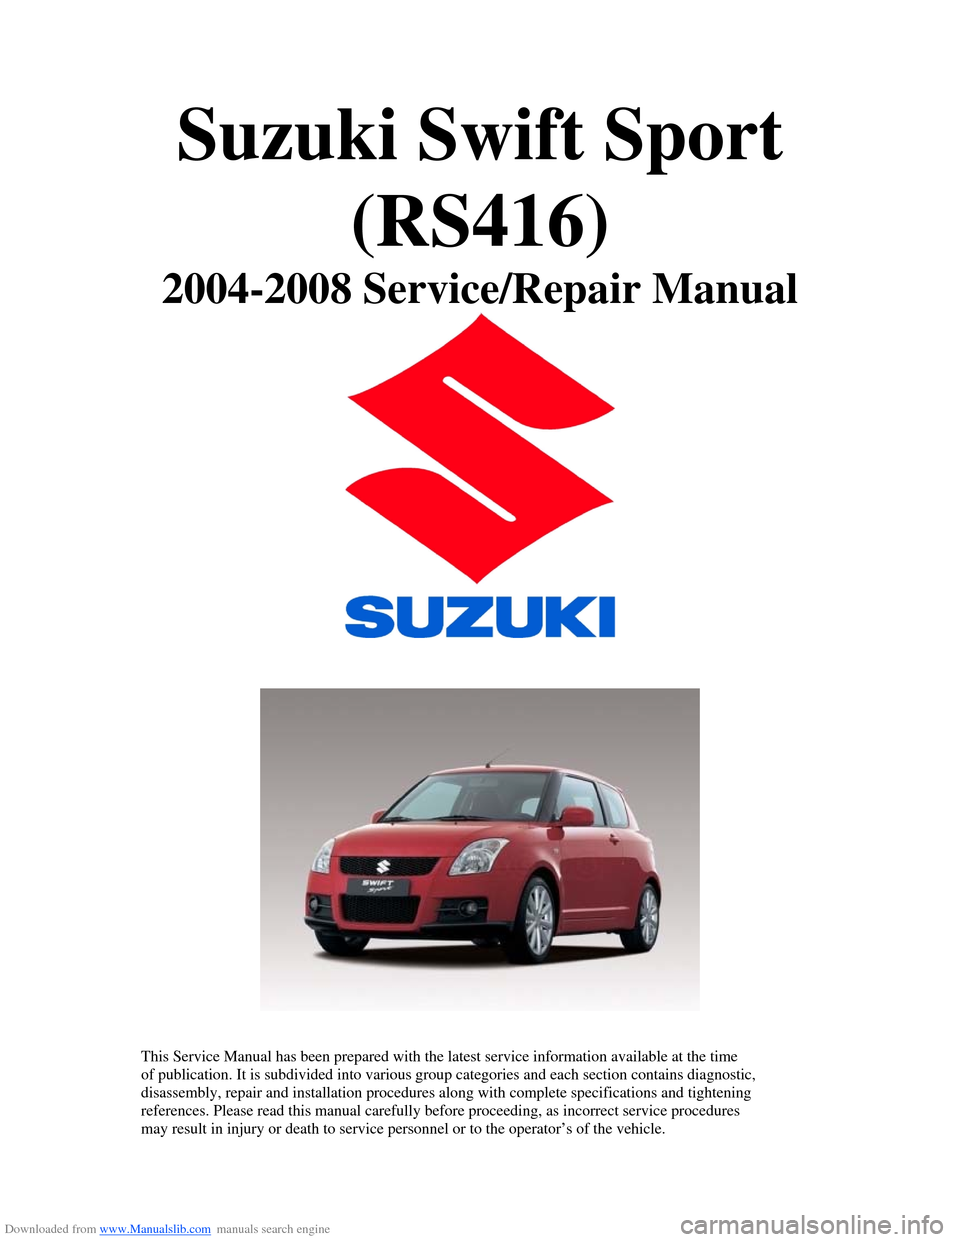 SUZUKI SWIFT 2008 2.G Service Workshop Manual Downloaded from www.Manualslib.com manuals search engine Suzuki Swift Sport (RS416) 
2004-2008 Service/Repair Manual 
 
 
  
 
This Service Manual has been prepared with the latest service information